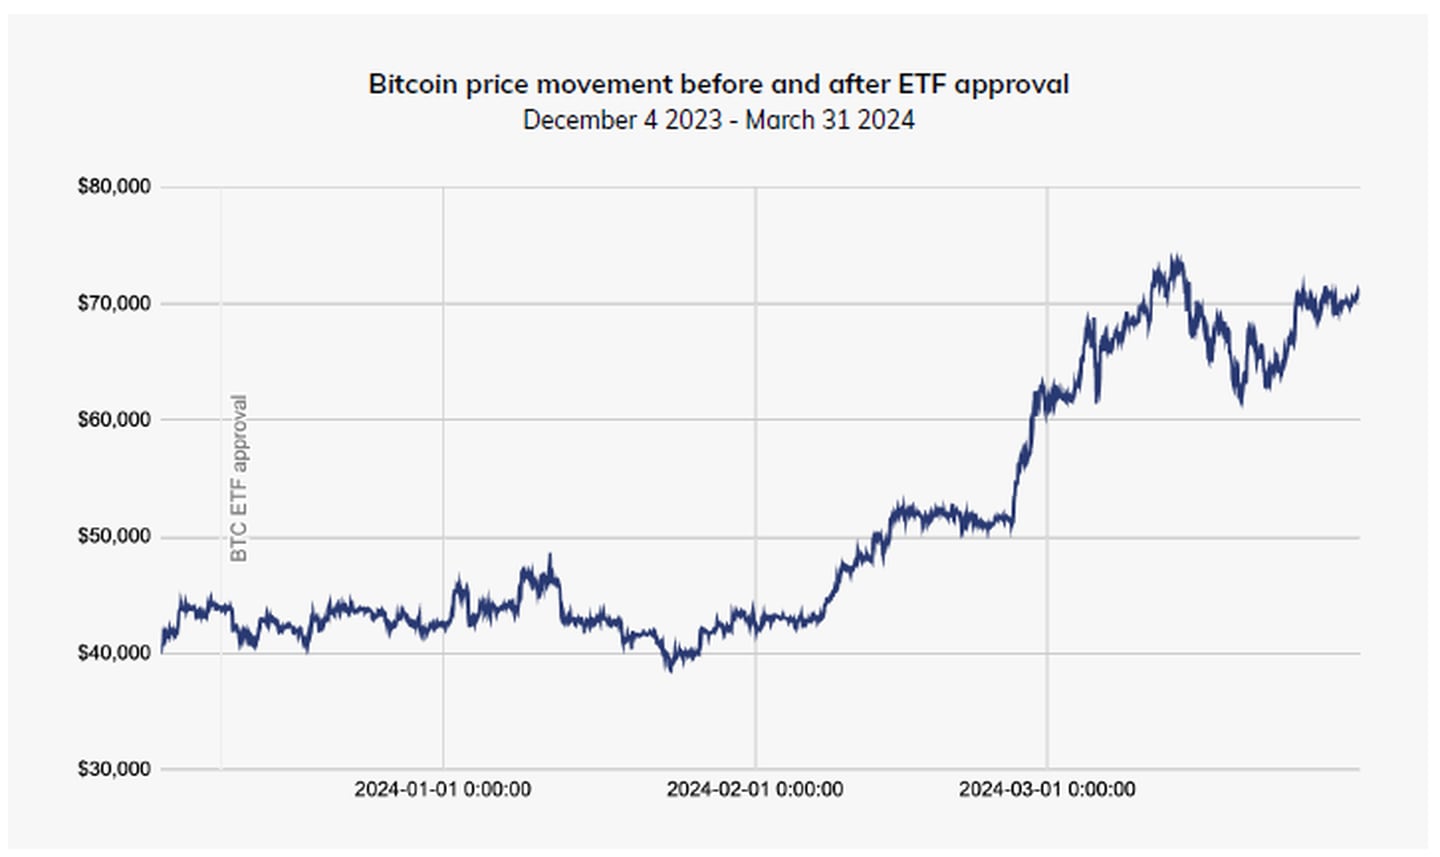 Bitcoin Price Movement Before and After ETF Approval